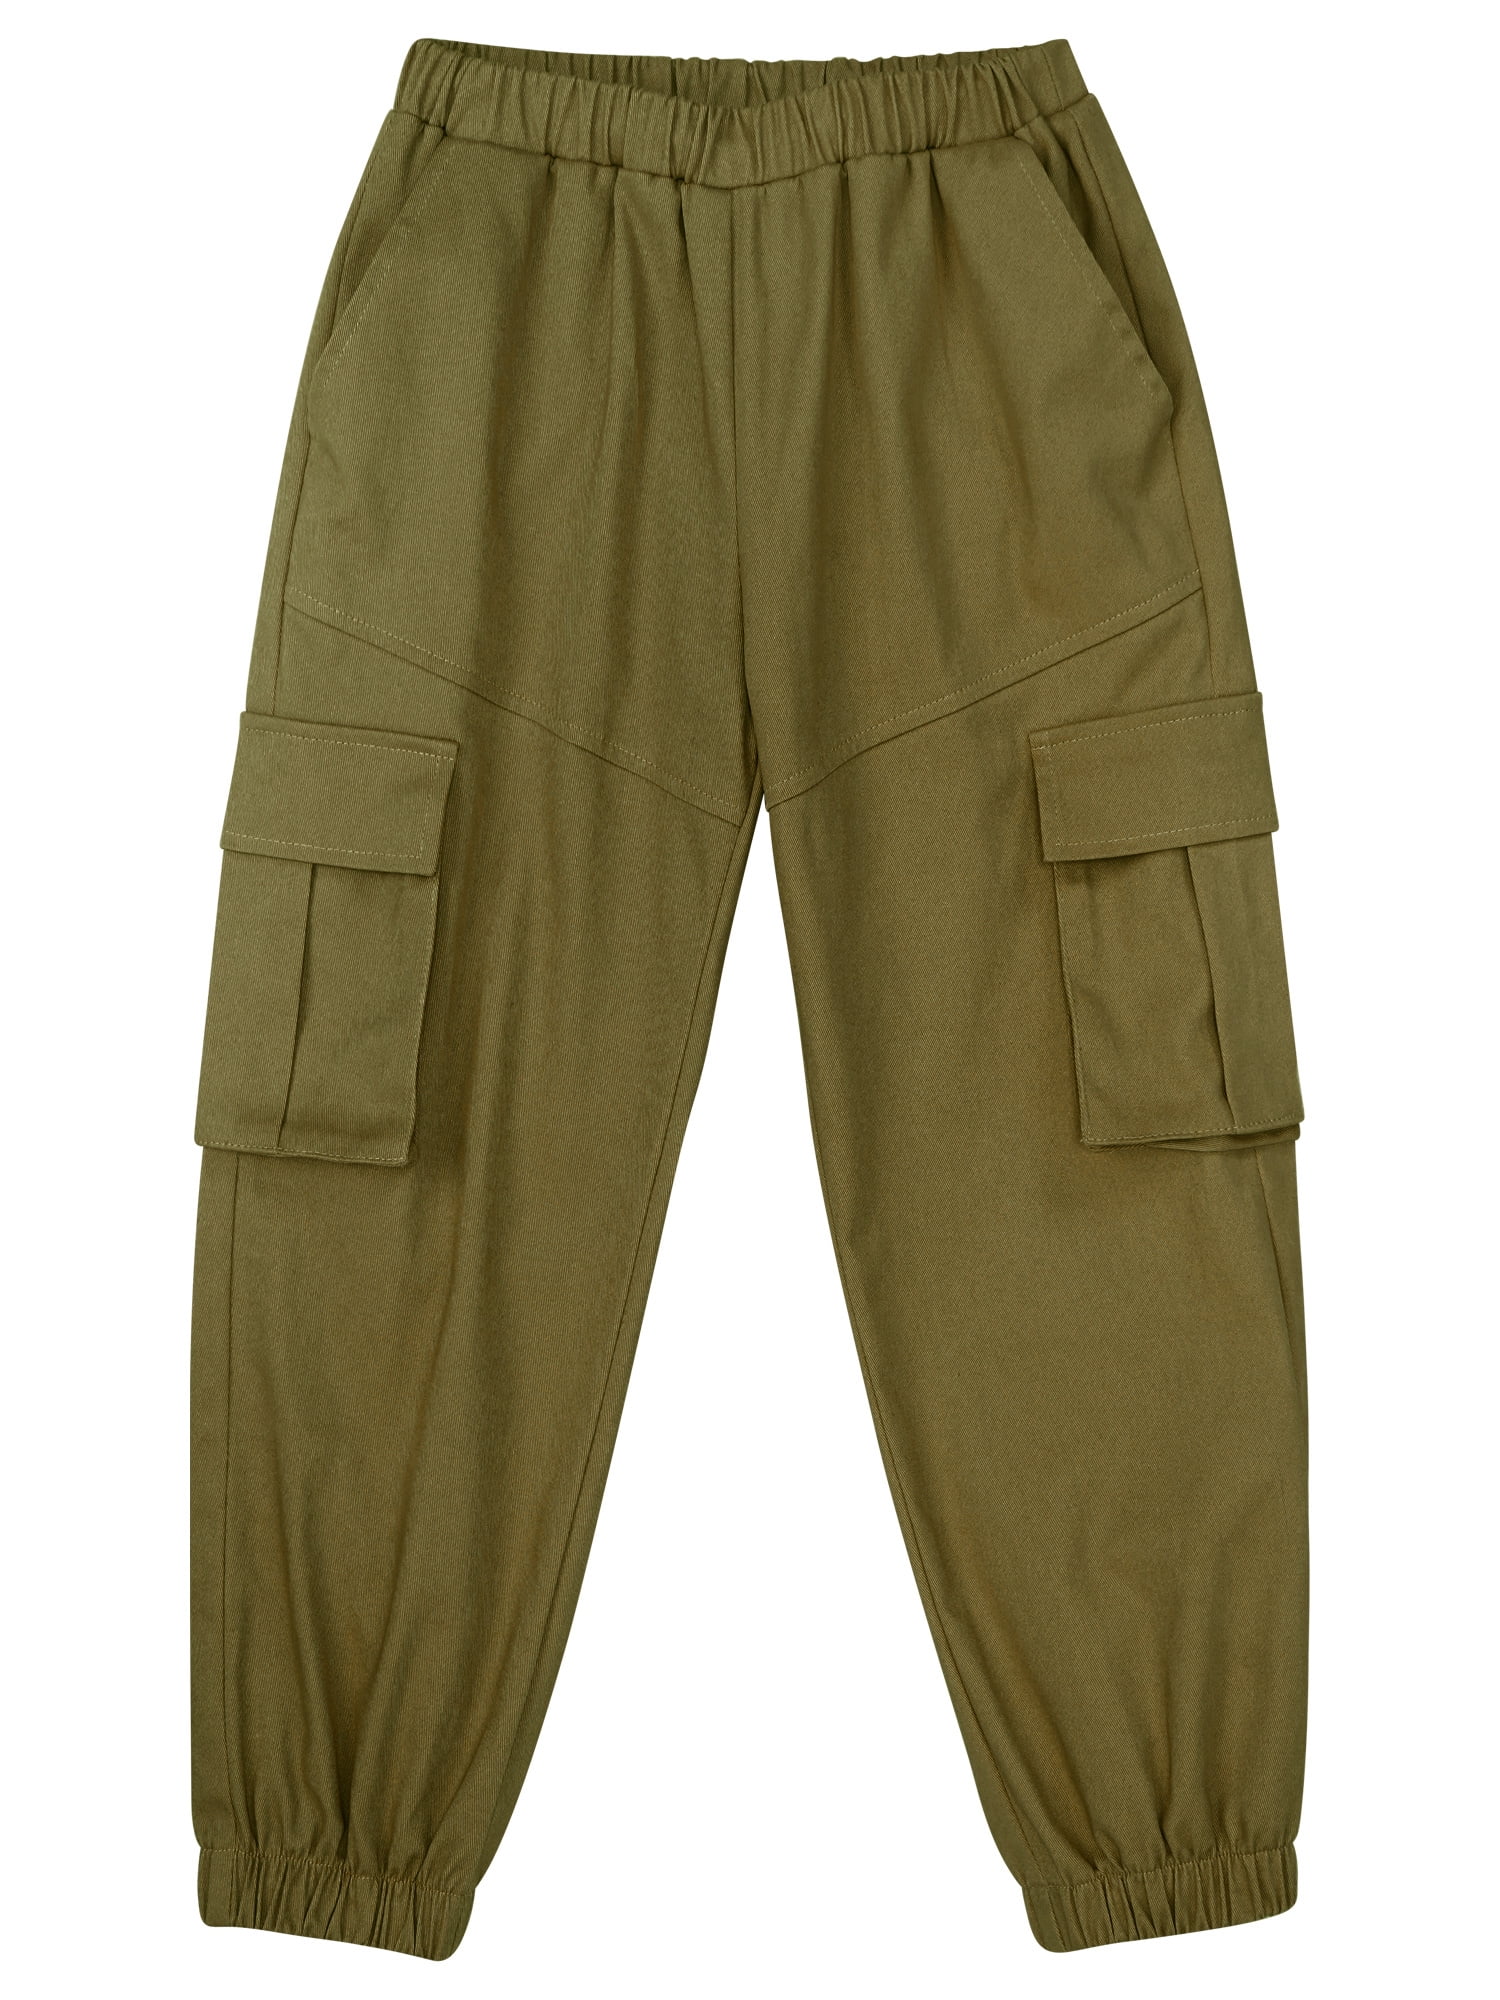 Dungarees Kids Boys Green 6-14 Casual 14 Army Cargo YiZYiF Pants,Sizes Moisture-Wicking